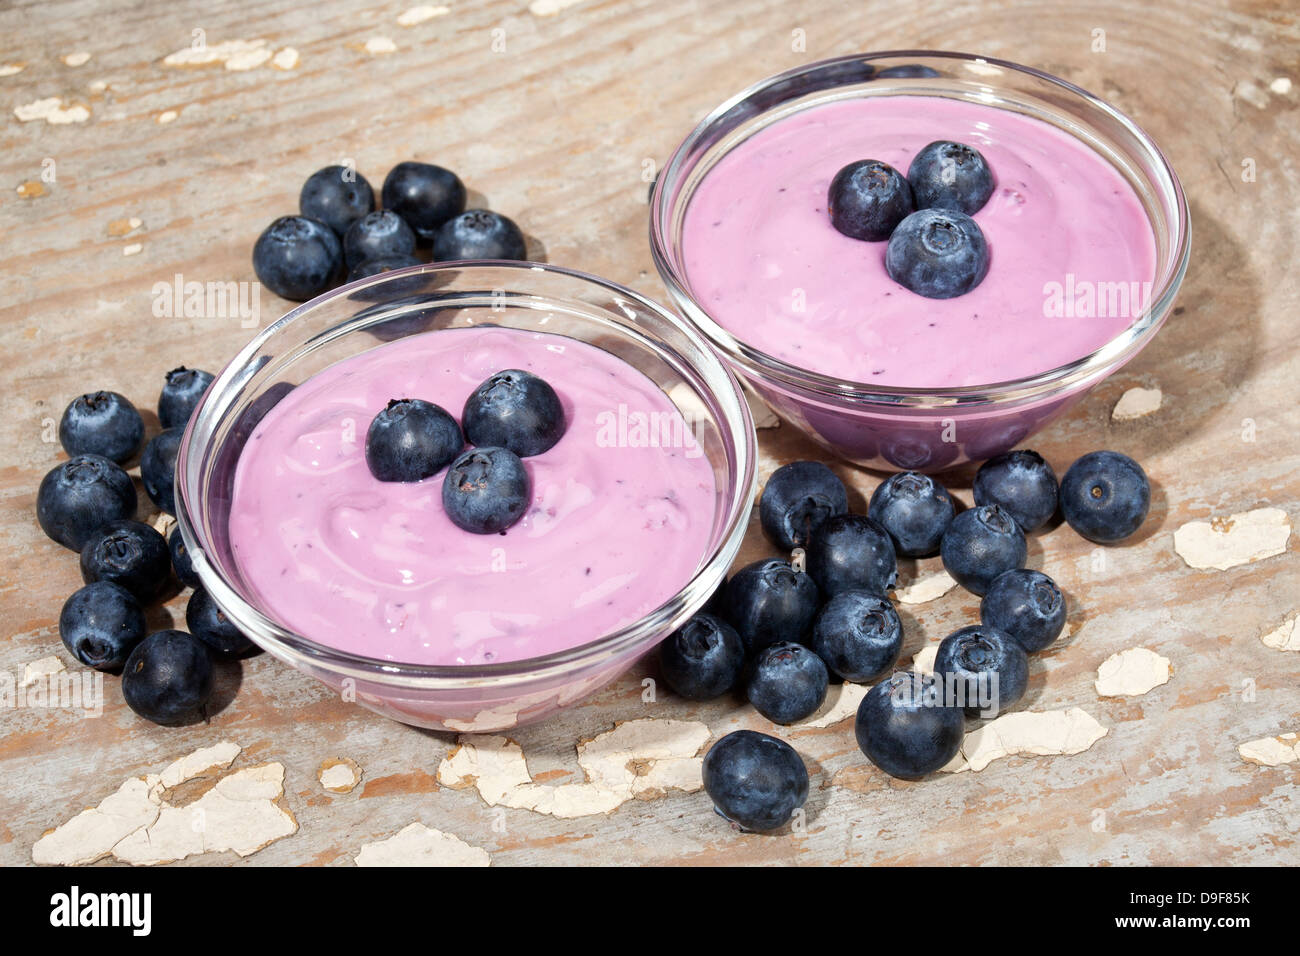 Glass bowl with yoghurt and blueberrys, Glass bowl with yoghurt and blueberries Stock Photo